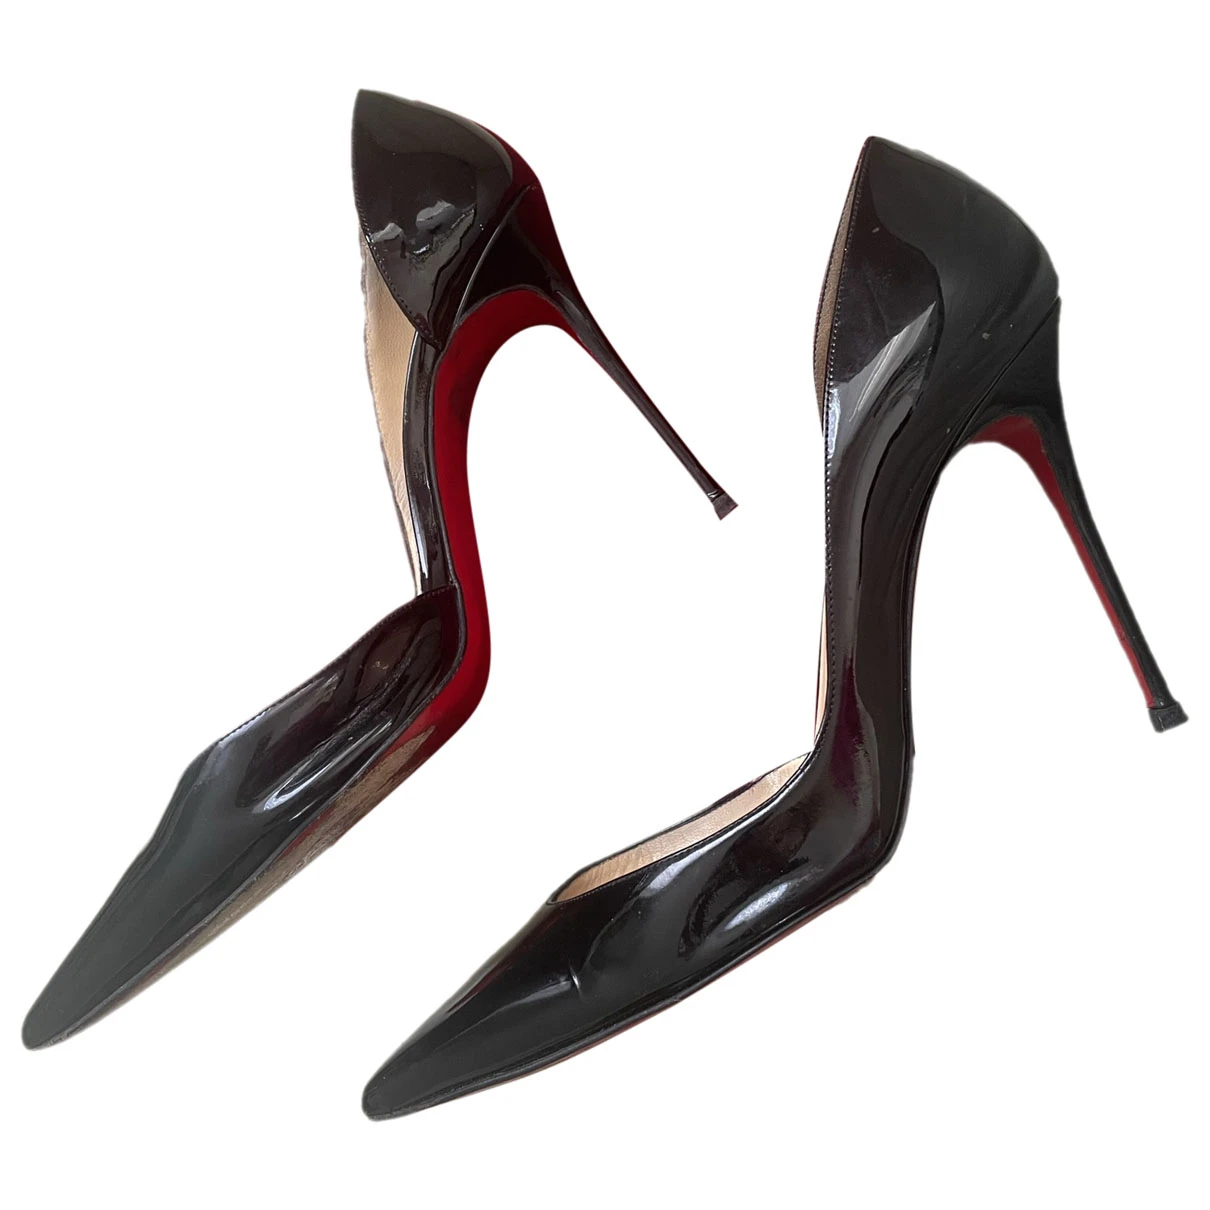 Pre-owned Christian Louboutin So Kate Patent Leather Heels In Black